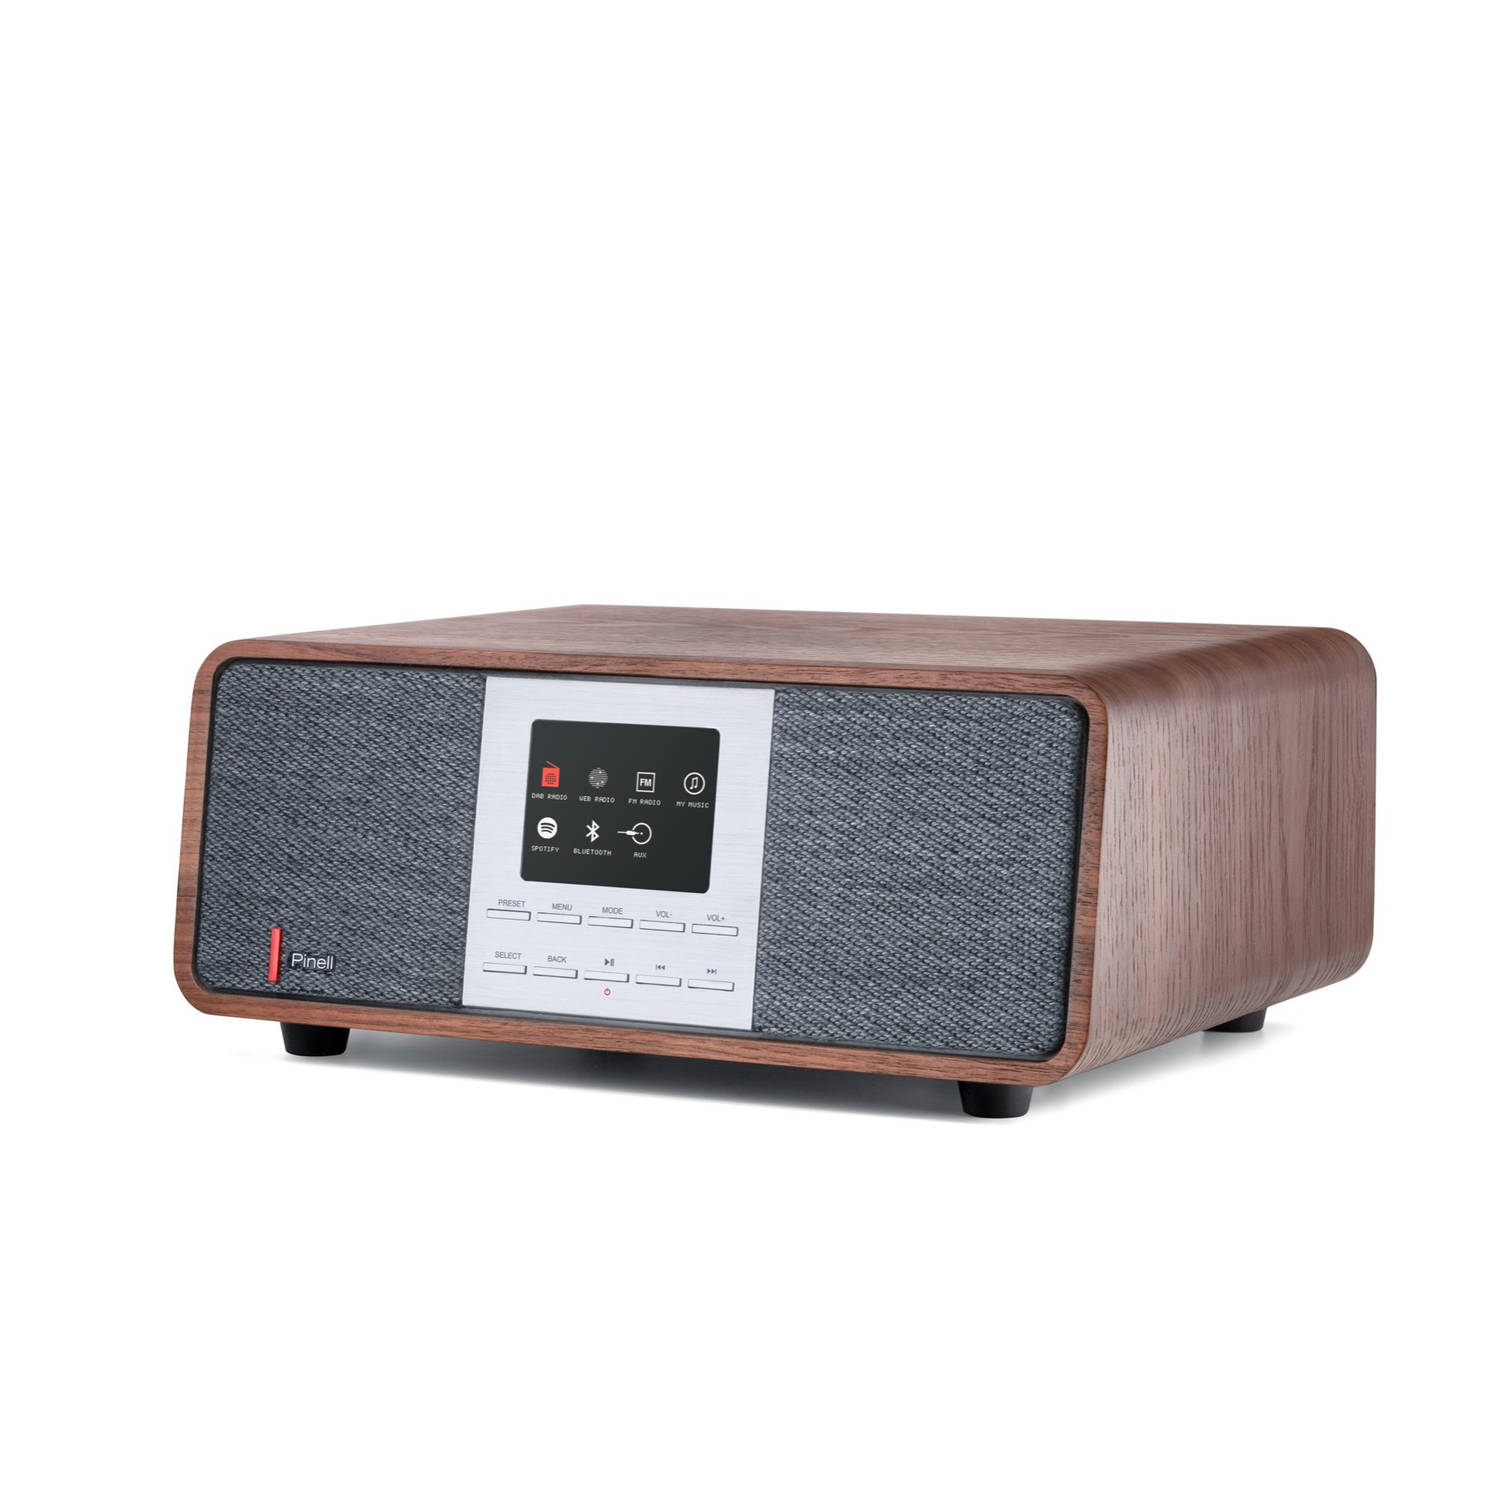 Pinell Supersound 501 Dab+ Internetradio Walnoot Hout